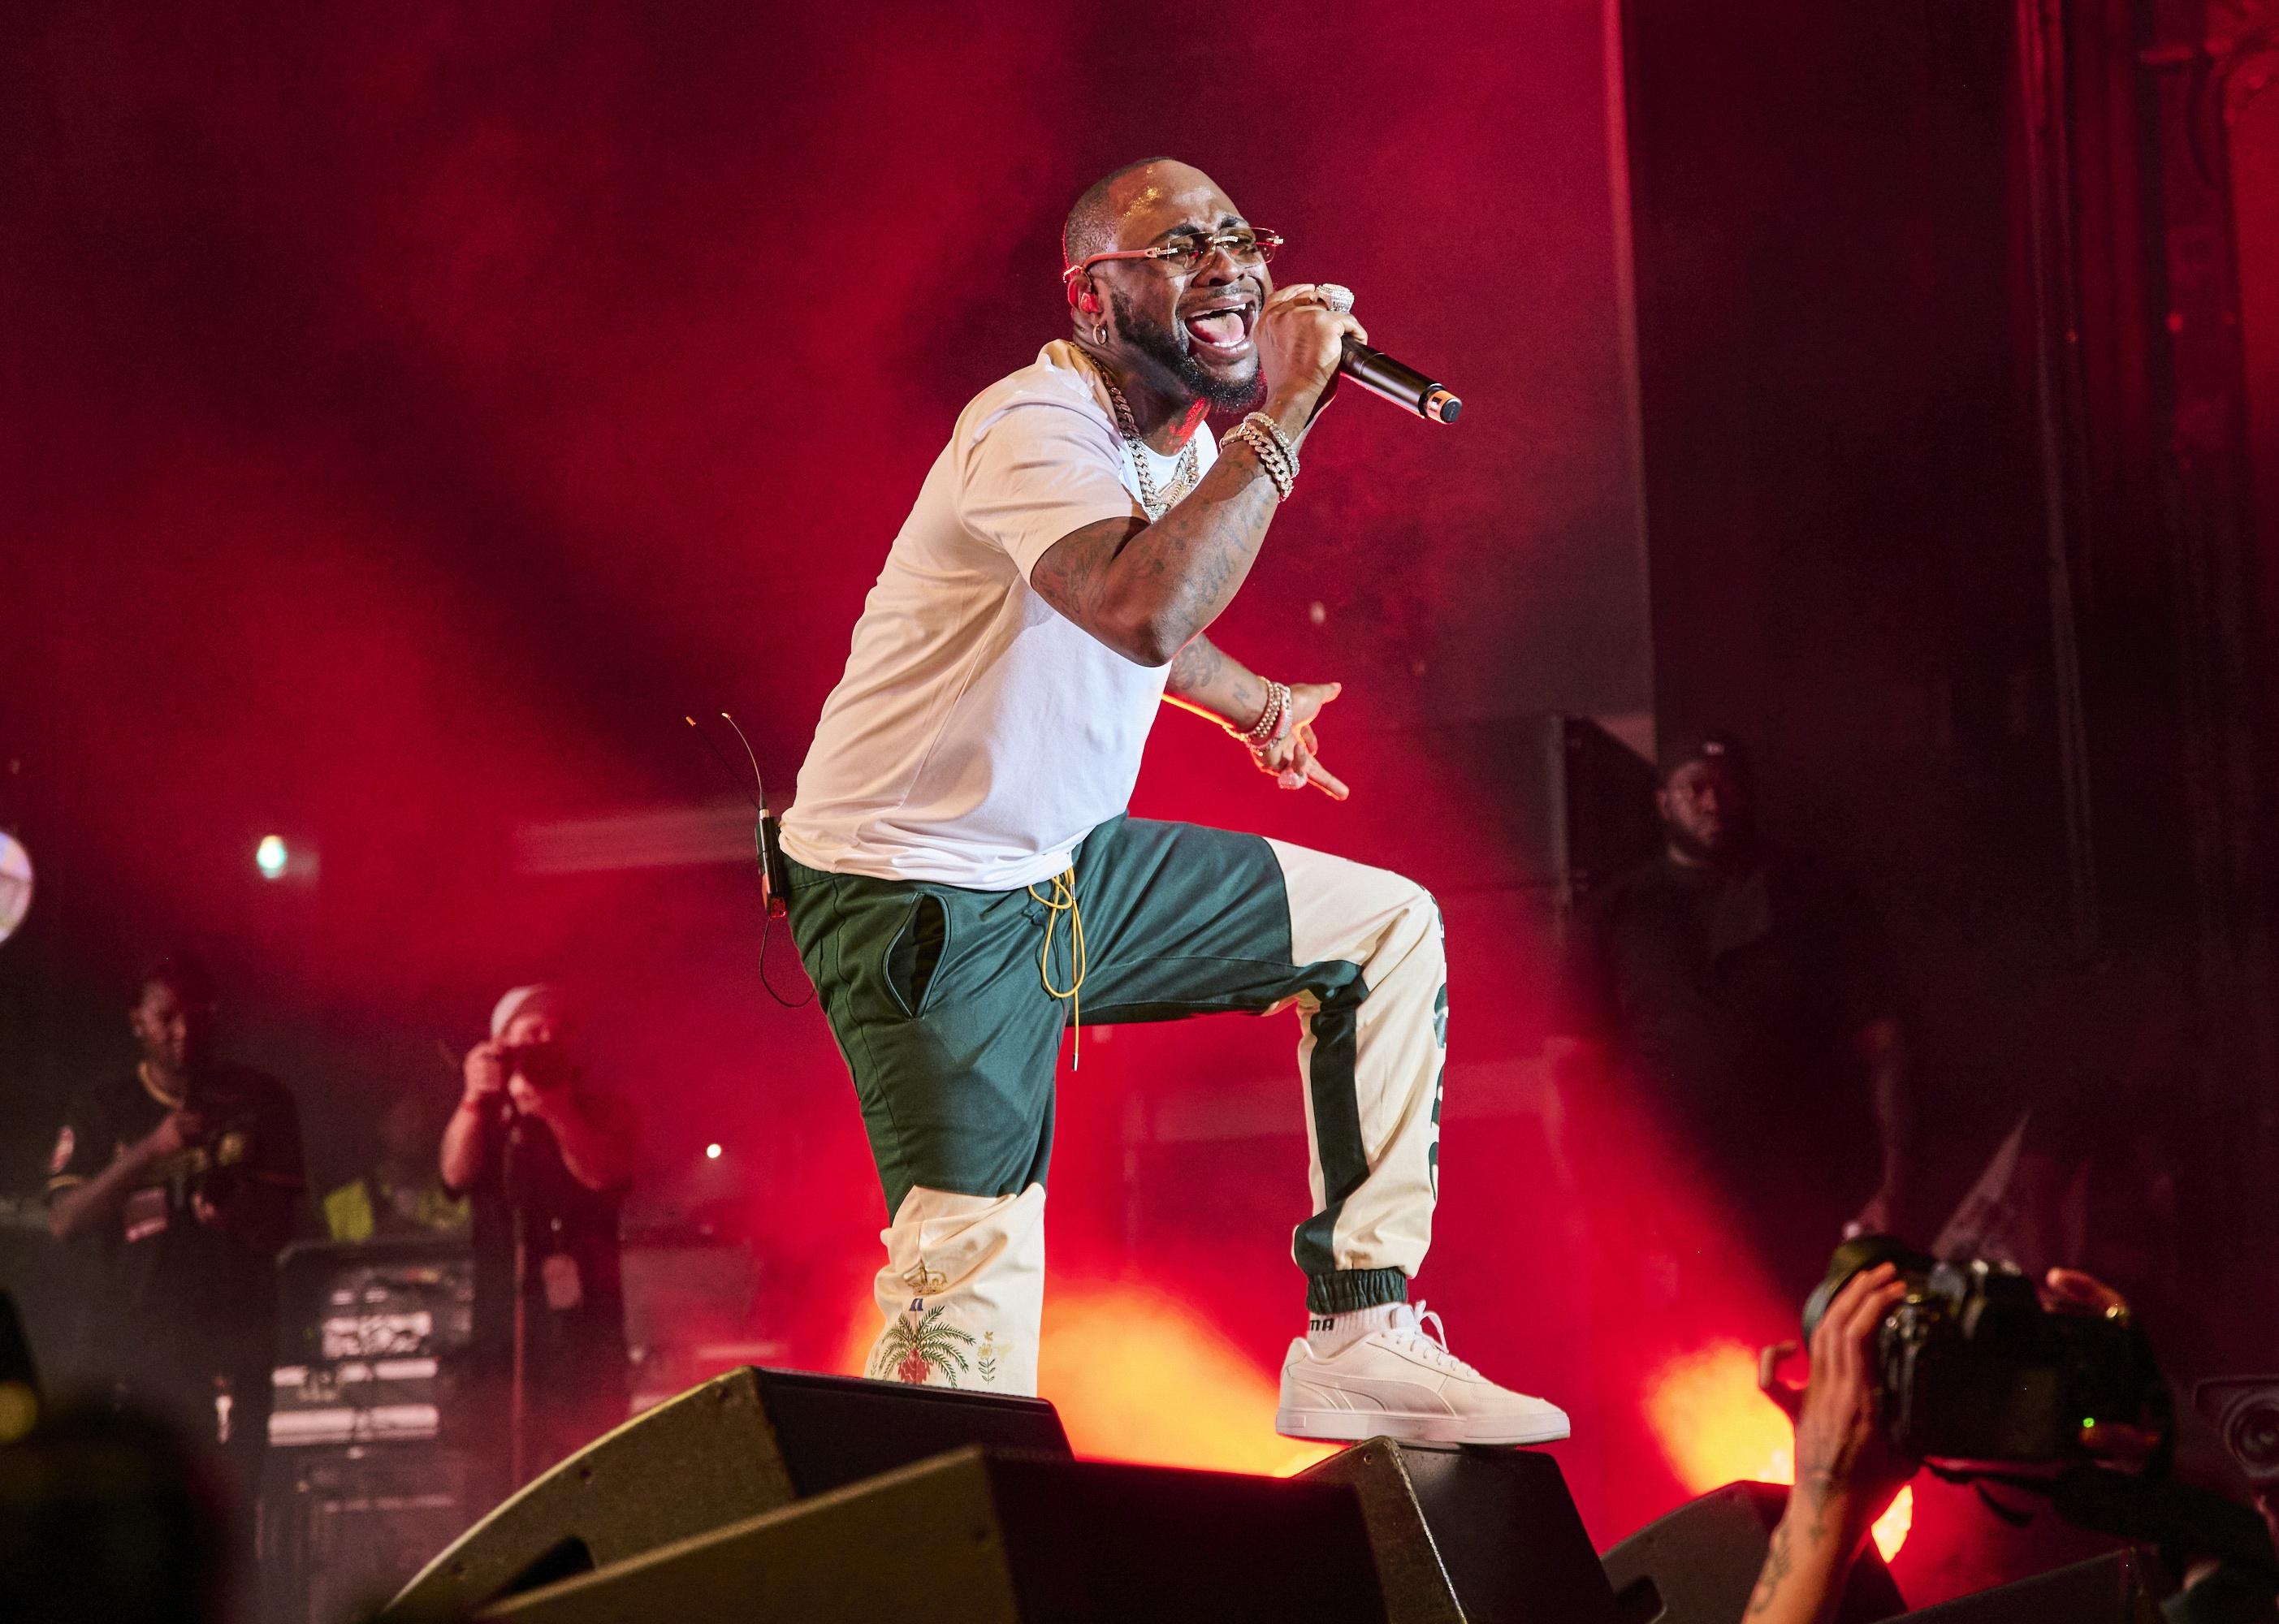 Davido dancing and singing onstage in green and white pants.